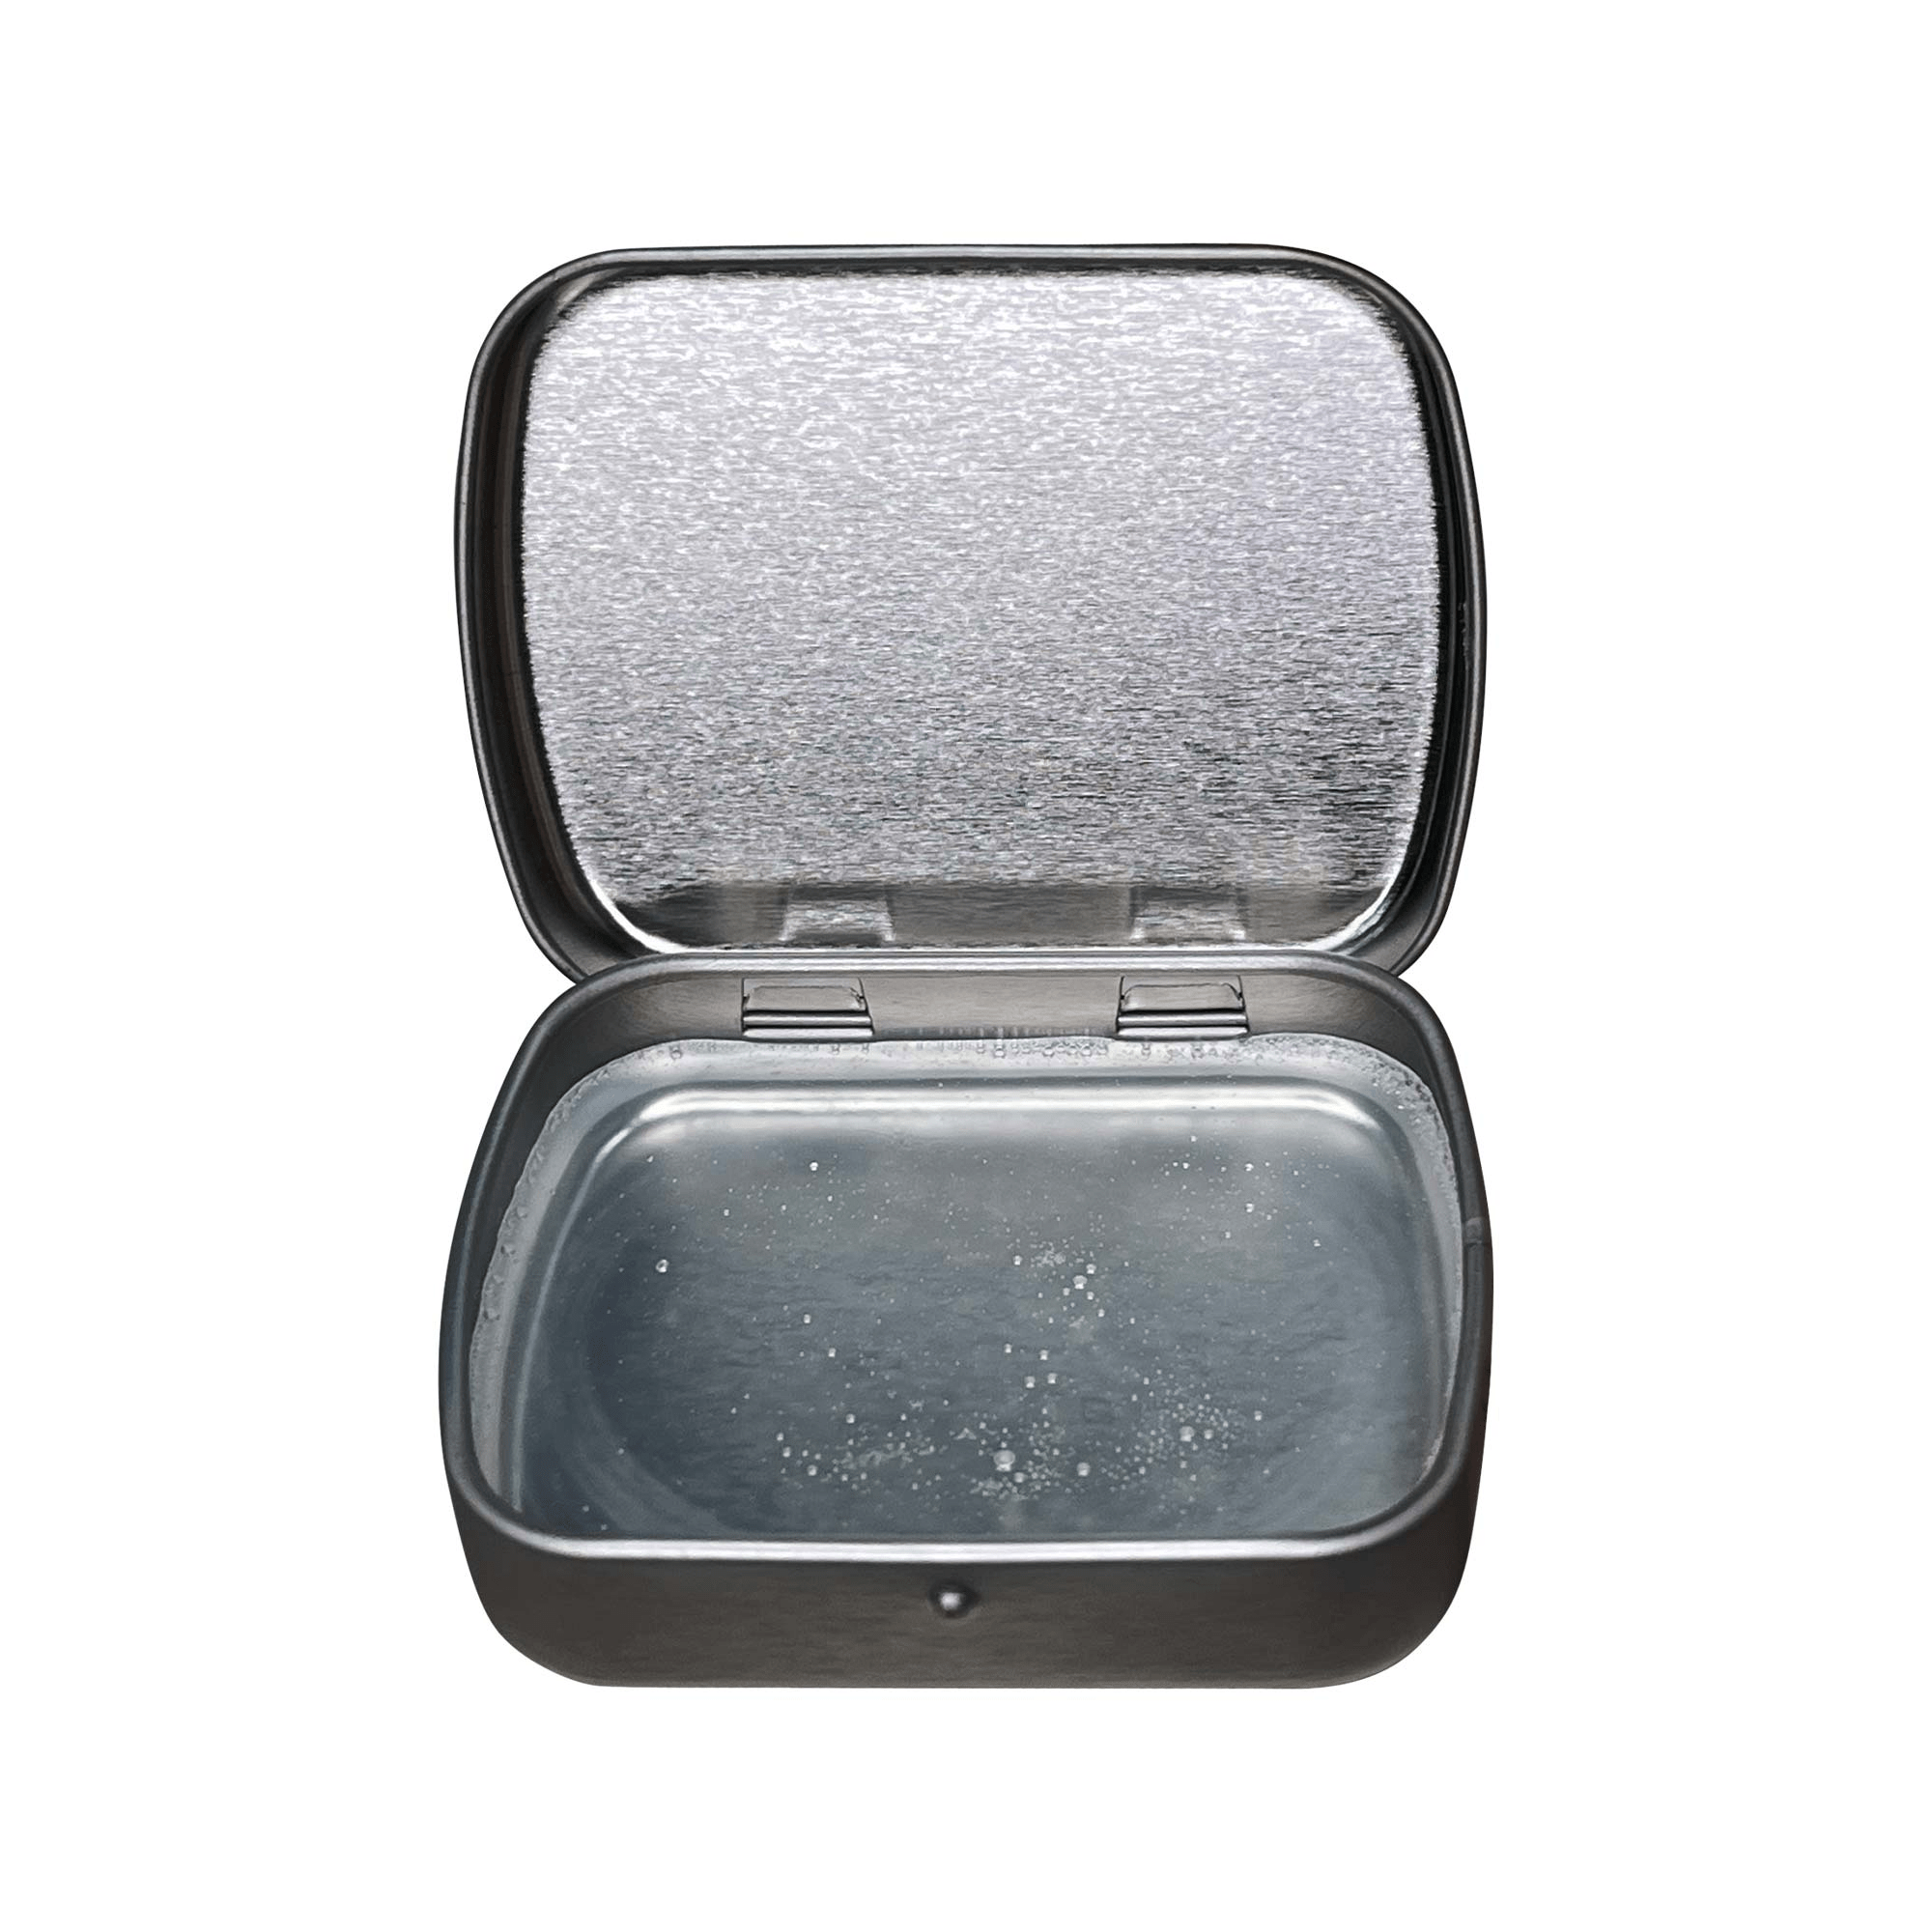 Brow Soap - Clear - Premium  from MIANIMED - Just $25! Shop now at MIANIMED